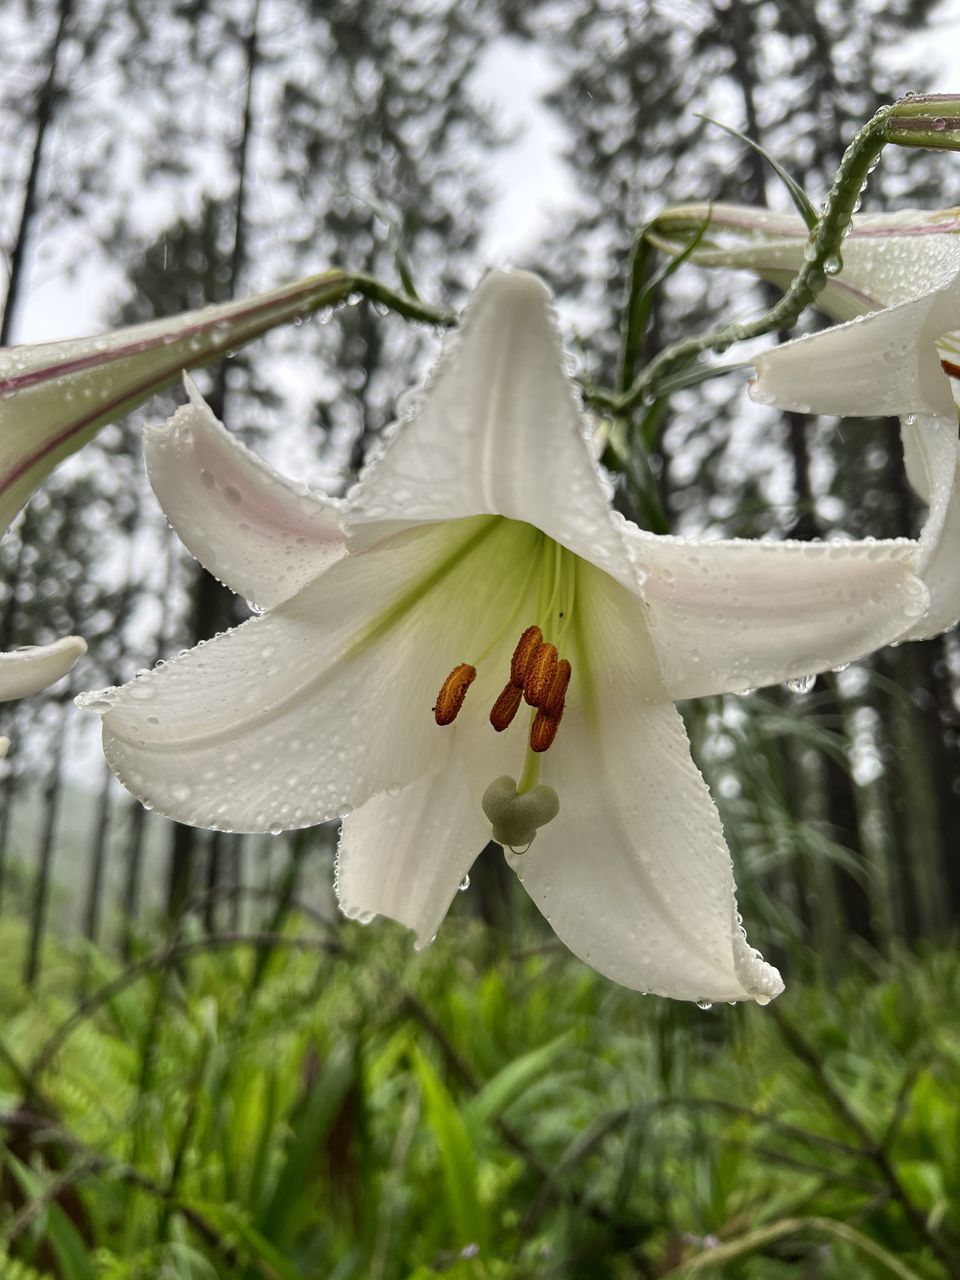 plant, flower, flowering plant, beauty in nature, growth, nature, tree, close-up, white, fragility, petal, freshness, focus on foreground, no people, lily, flower head, inflorescence, blossom, day, outdoors, pollen, springtime, branch, botany